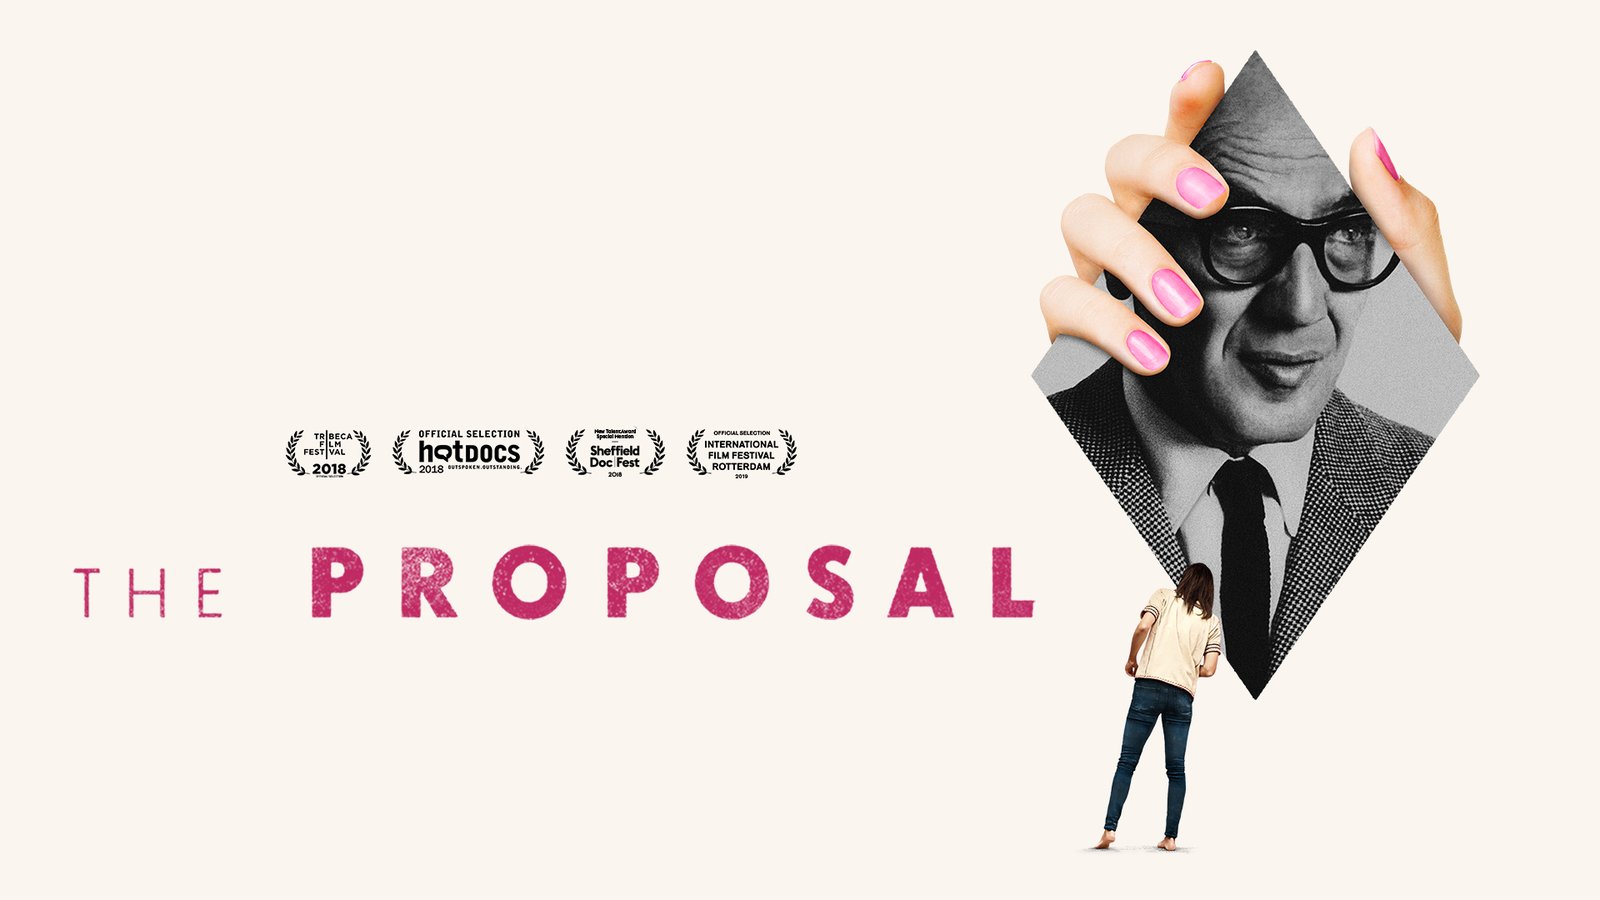 The Proposal - A Conceptual Art Project Based on the Work of Architect Luis Barragán